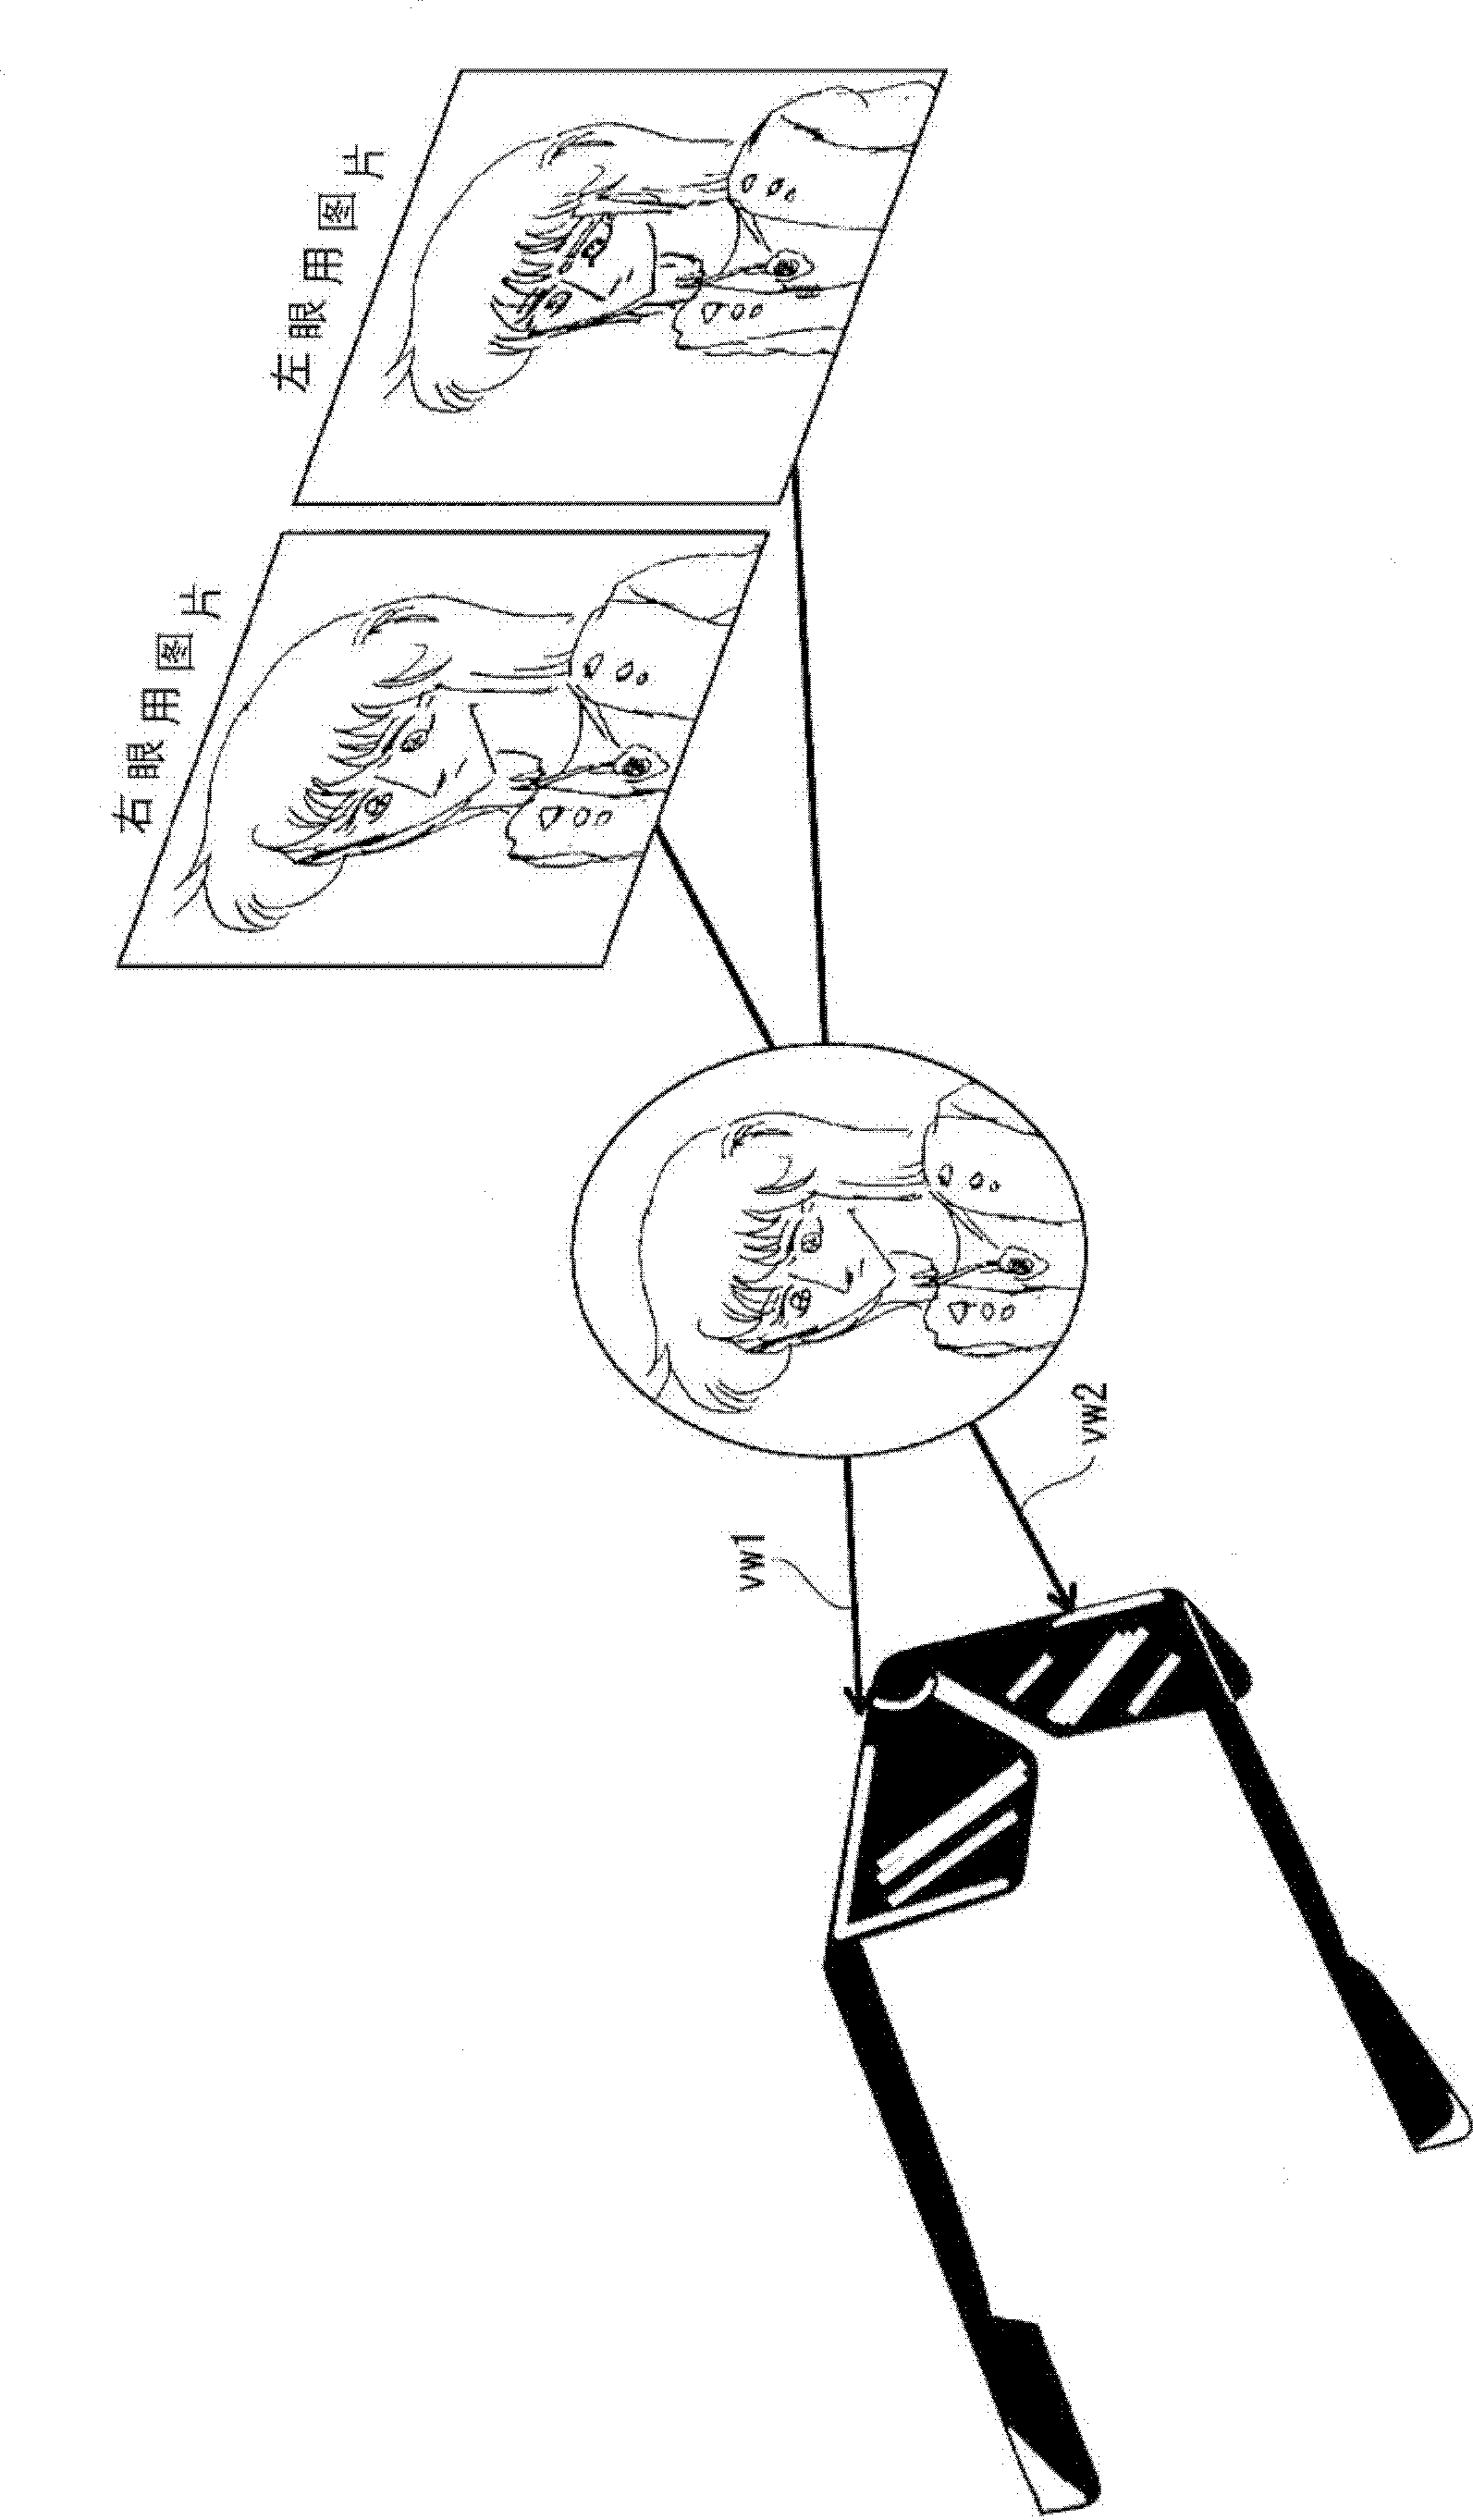 Reproduction device, integrated circuit, and reproduction method